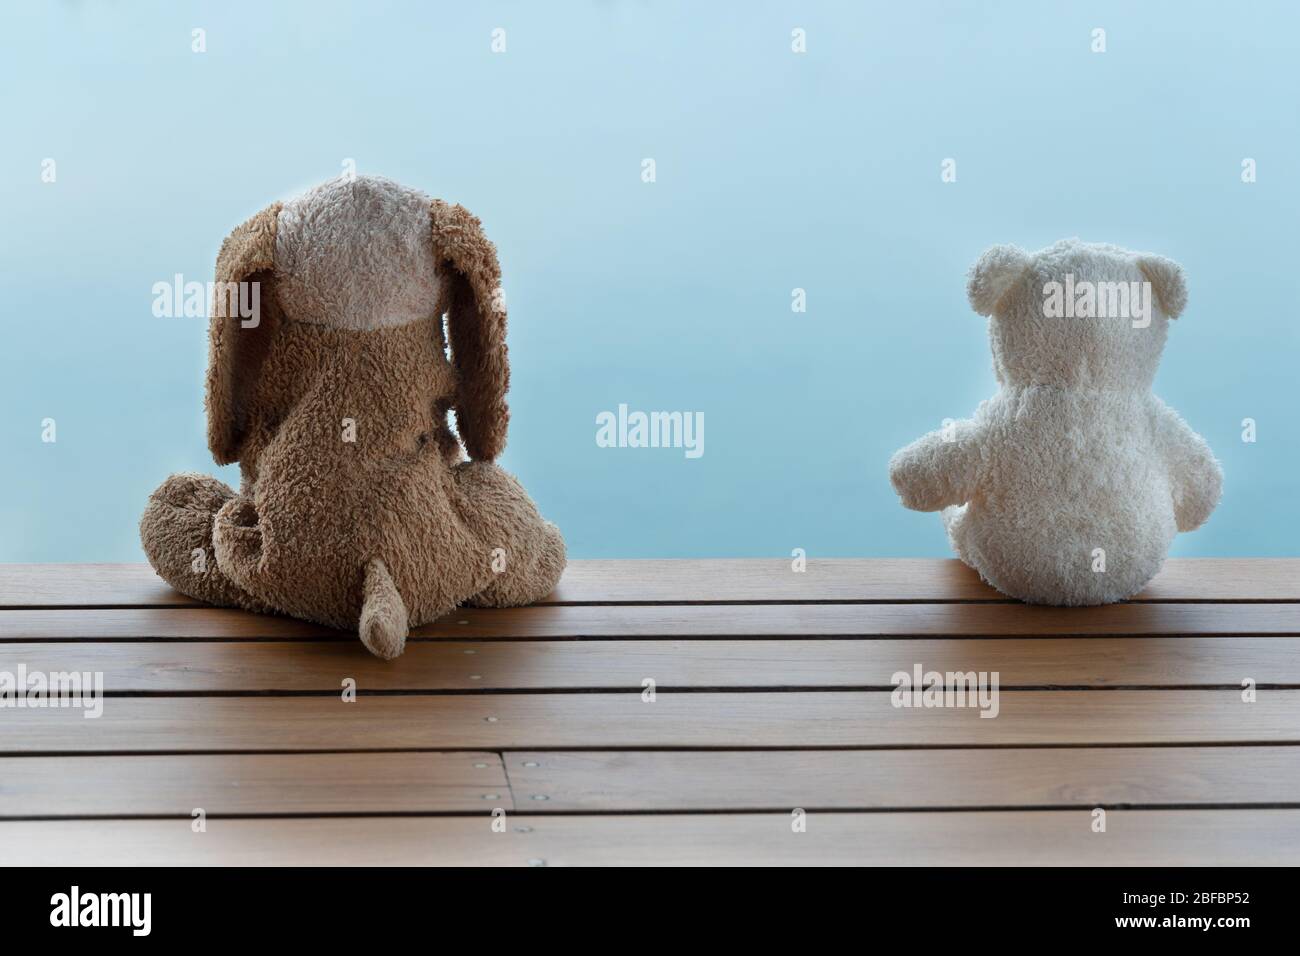 two fluffy brown dog and white bear doll sitting on wood terrace with blue nature water in social distancing concept Stock Photo